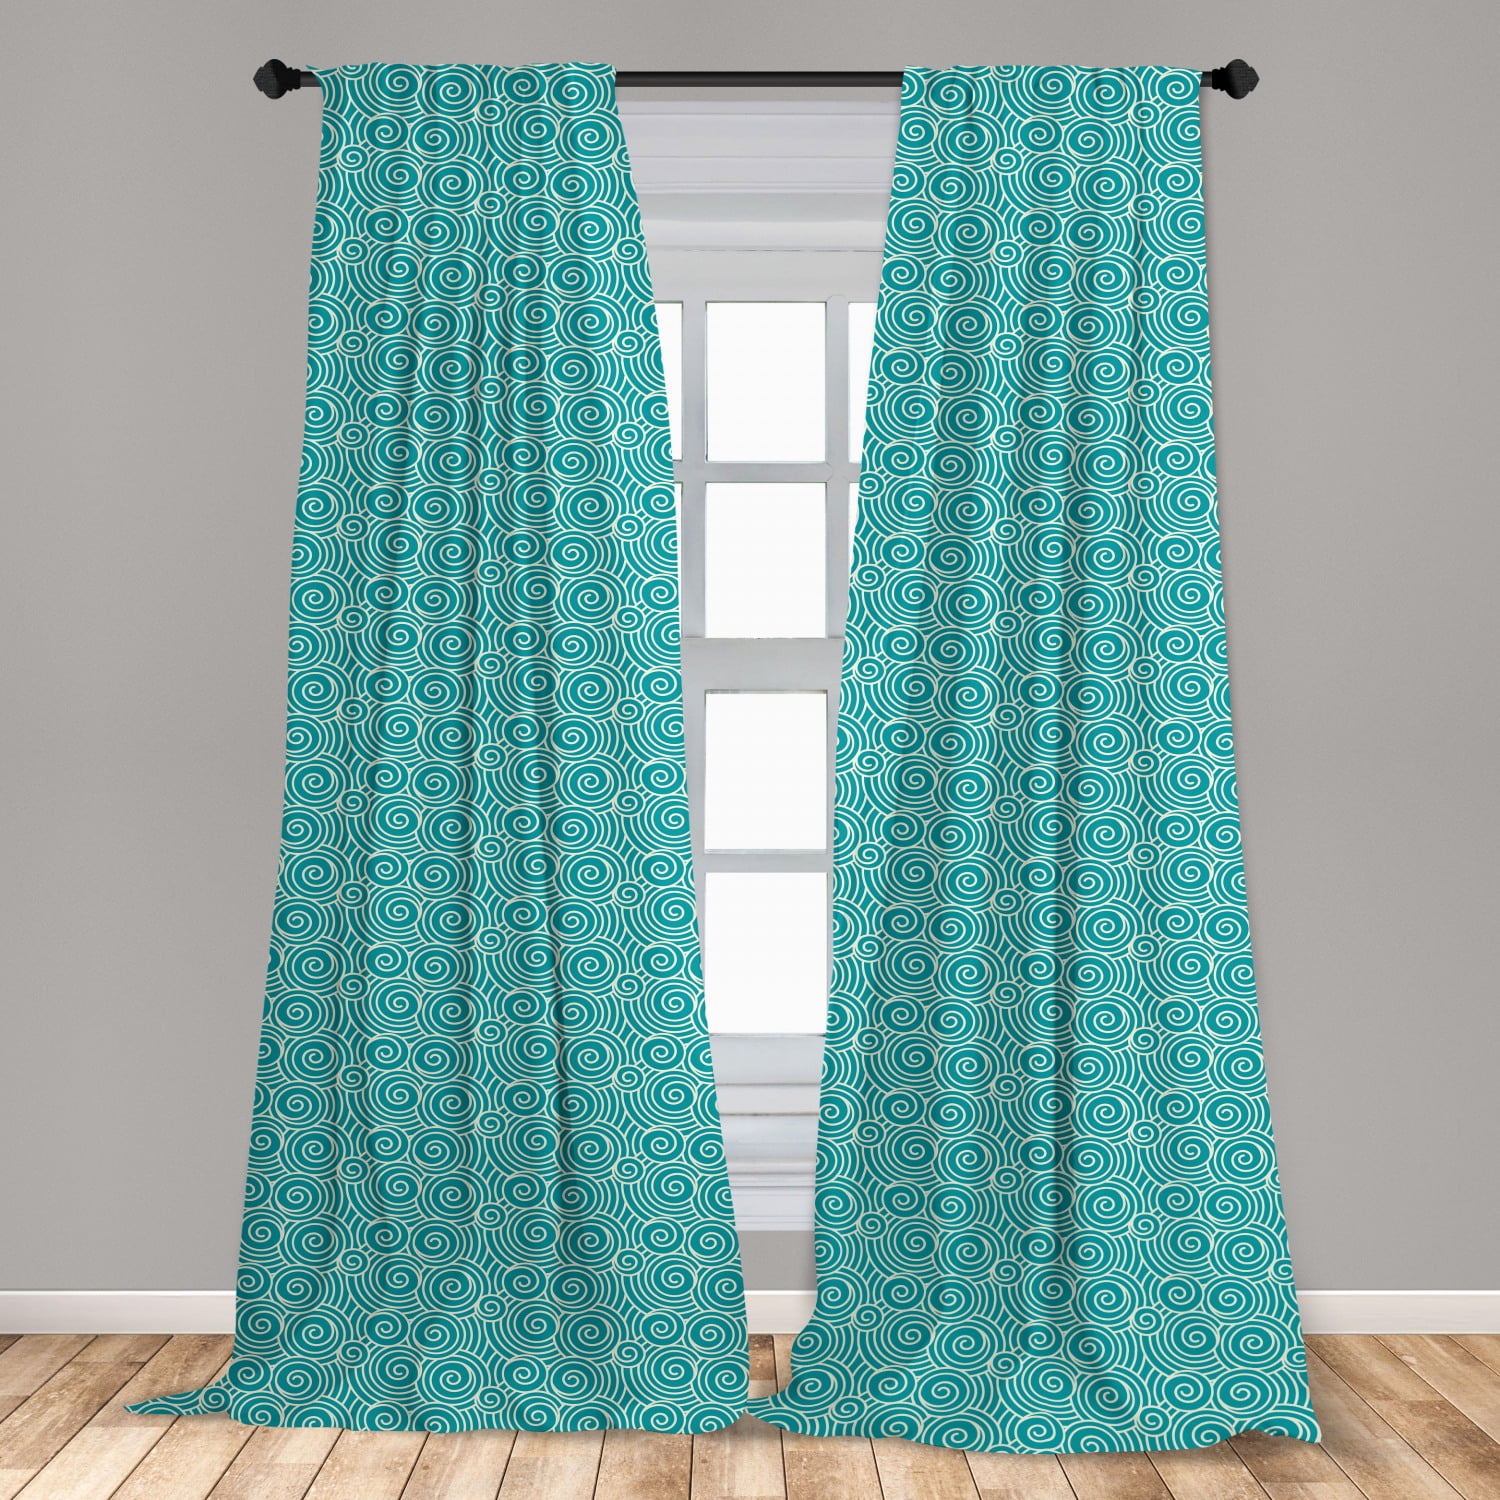 ivory-and-blue-curtains-2-panels-set-oriental-doodle-style-spirals